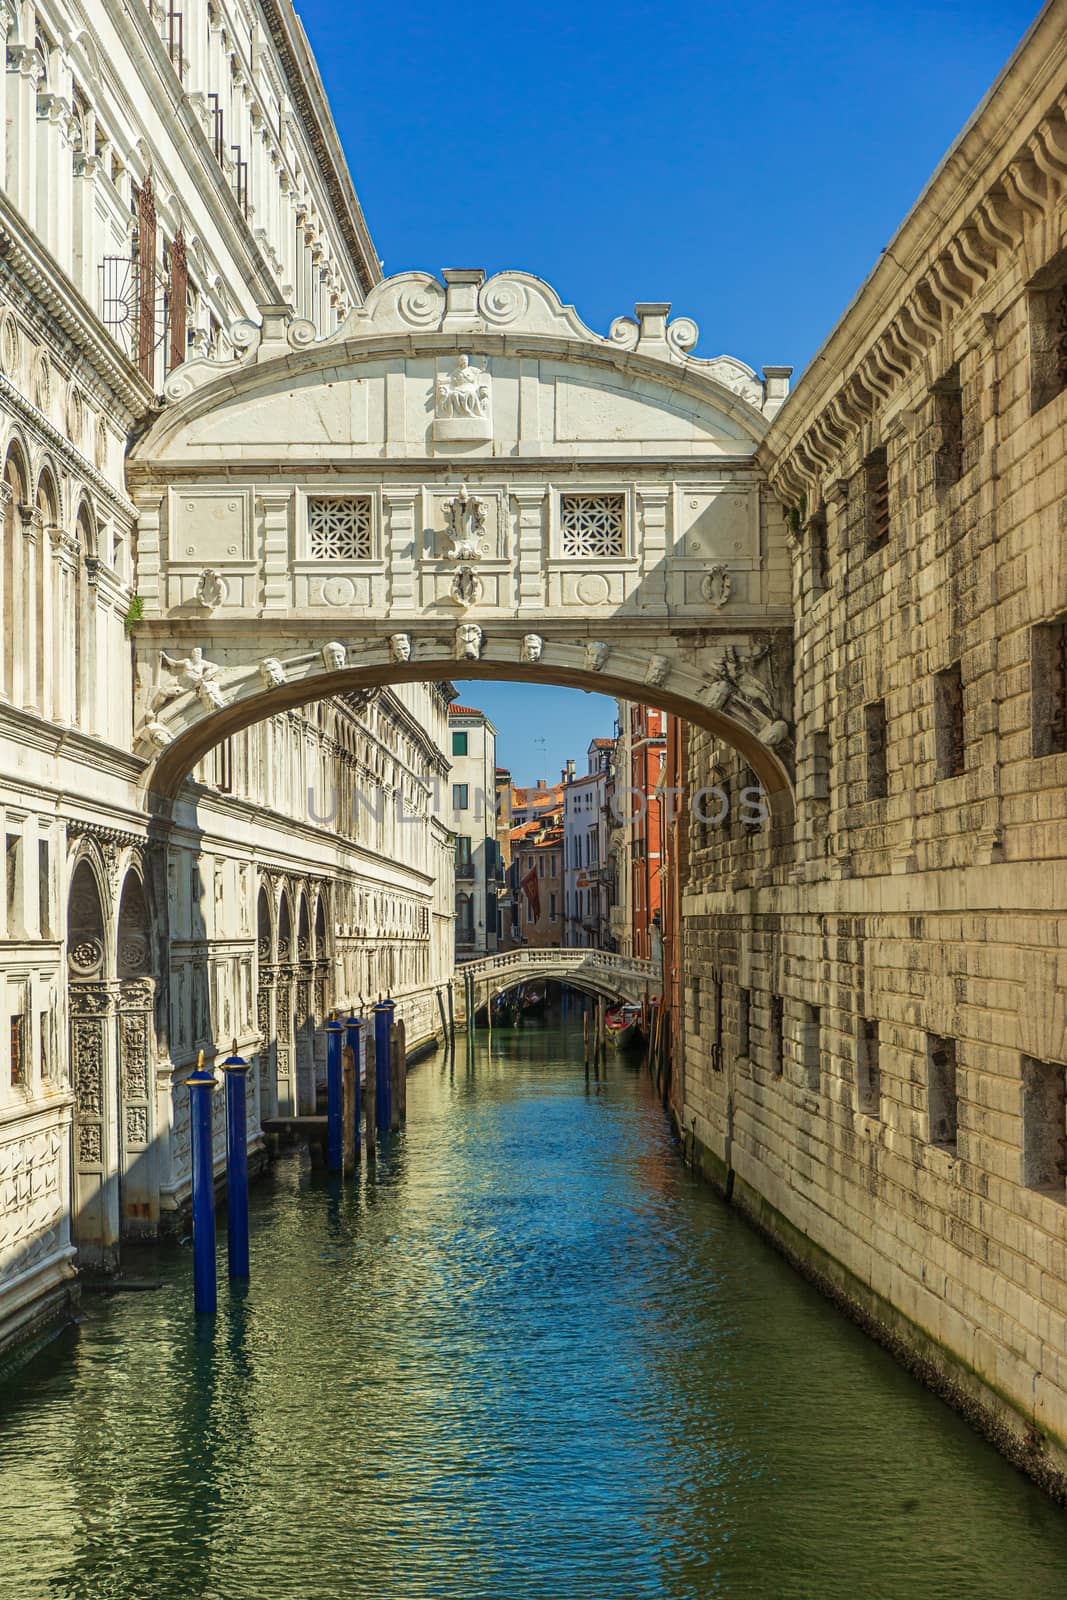 Bridge of Sighs in Venice, Italy by COffe